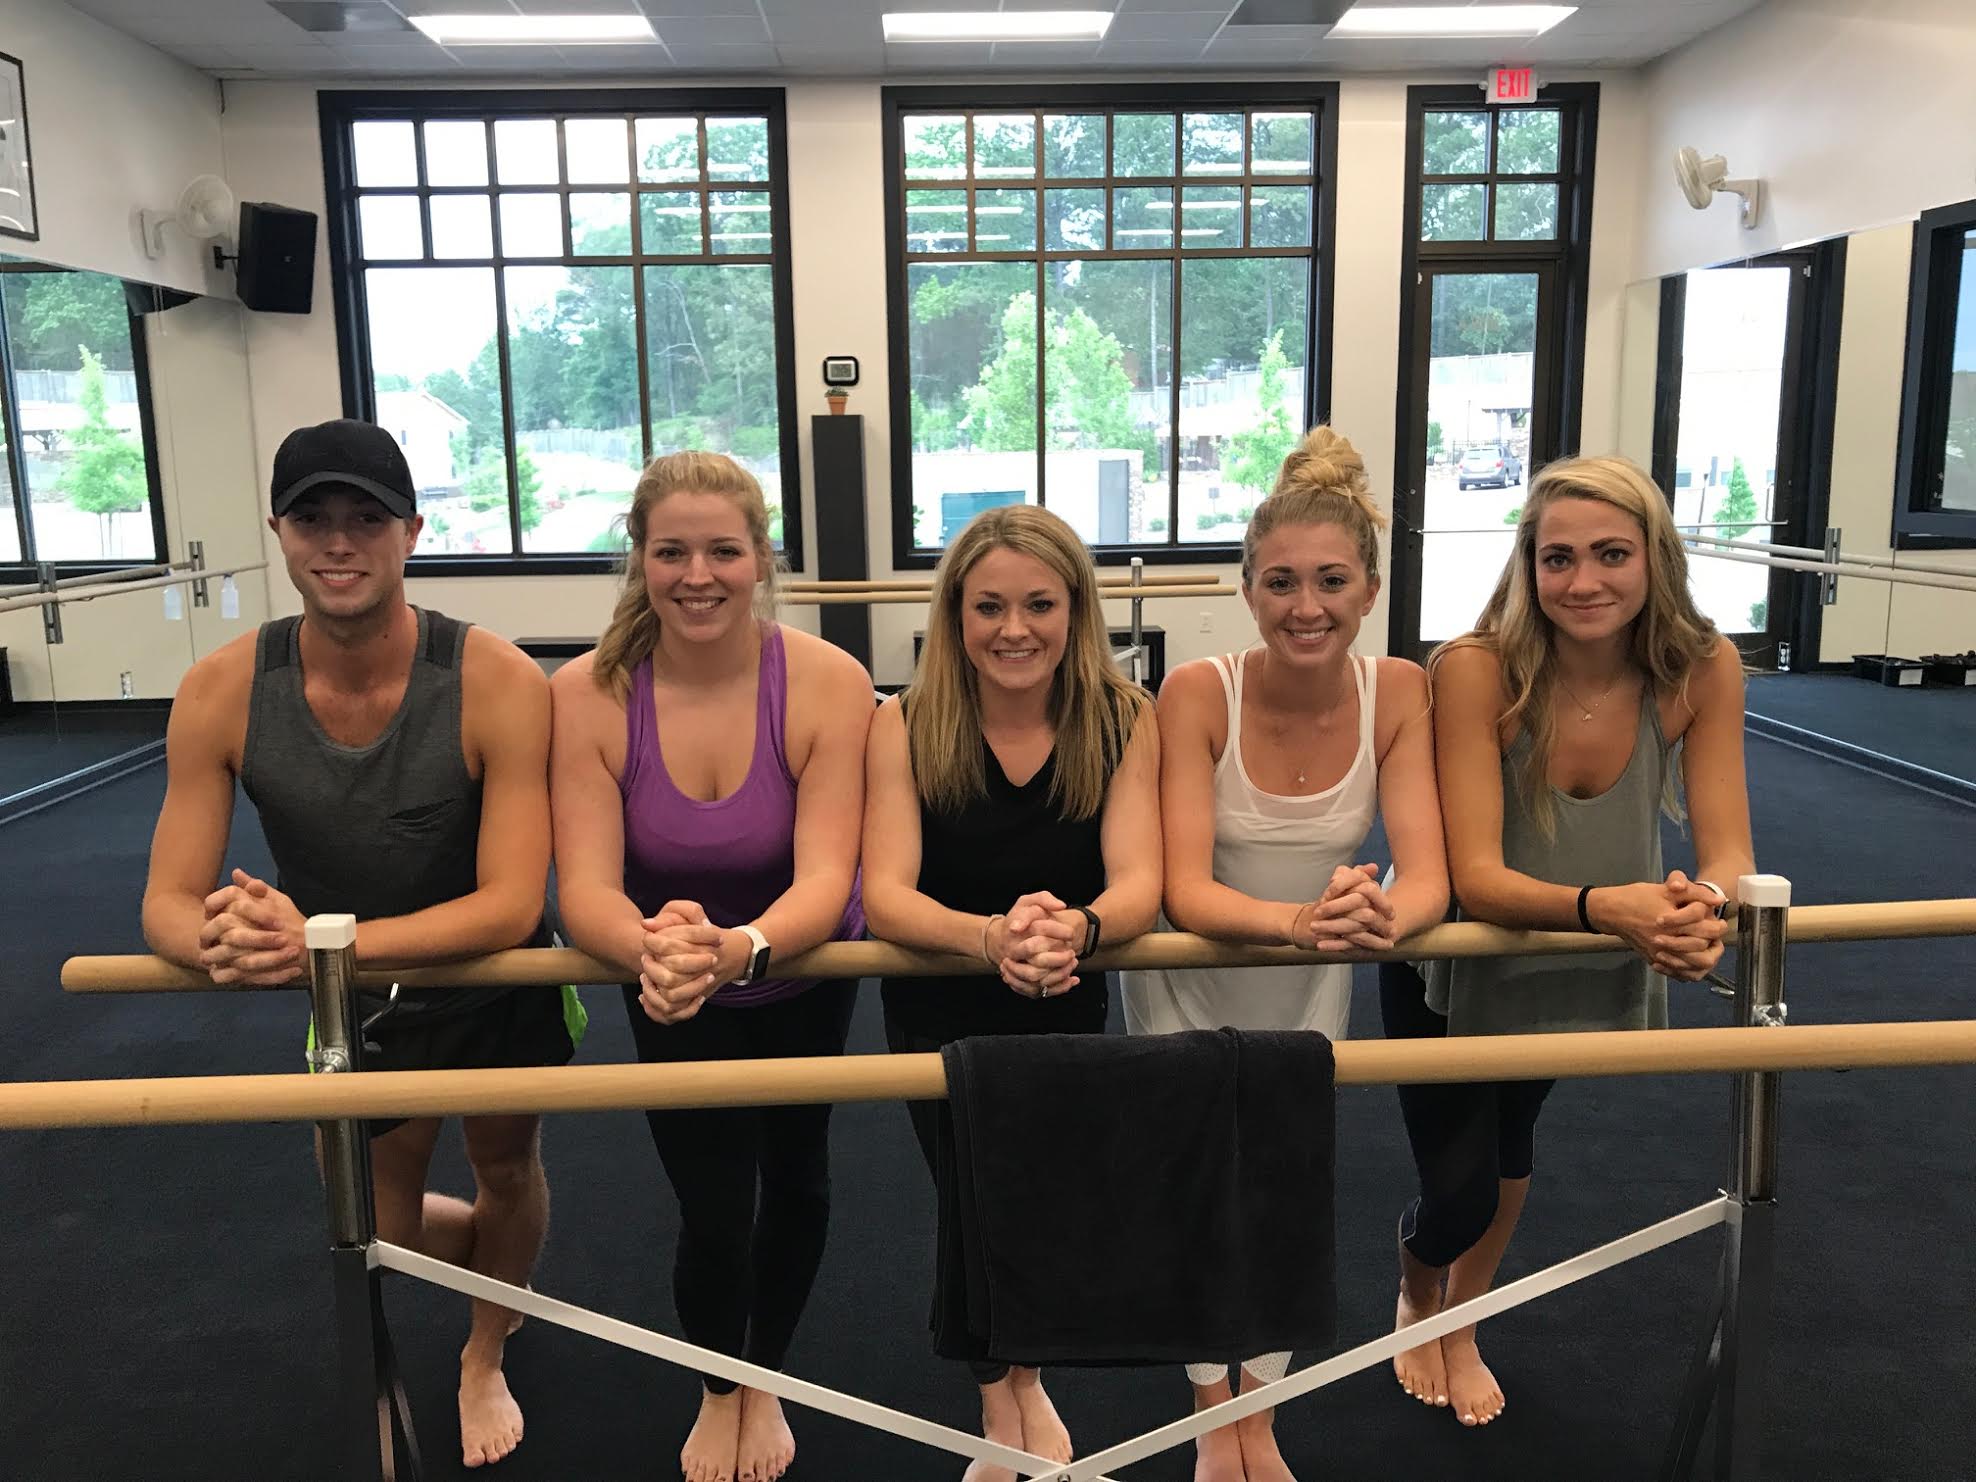  Barre Fitness: 3 Ballet Inspired Cardio, Strength + Abs  Routines to Sculpt, Slim with Jessica Smith : Jessica Smith: Movies & TV